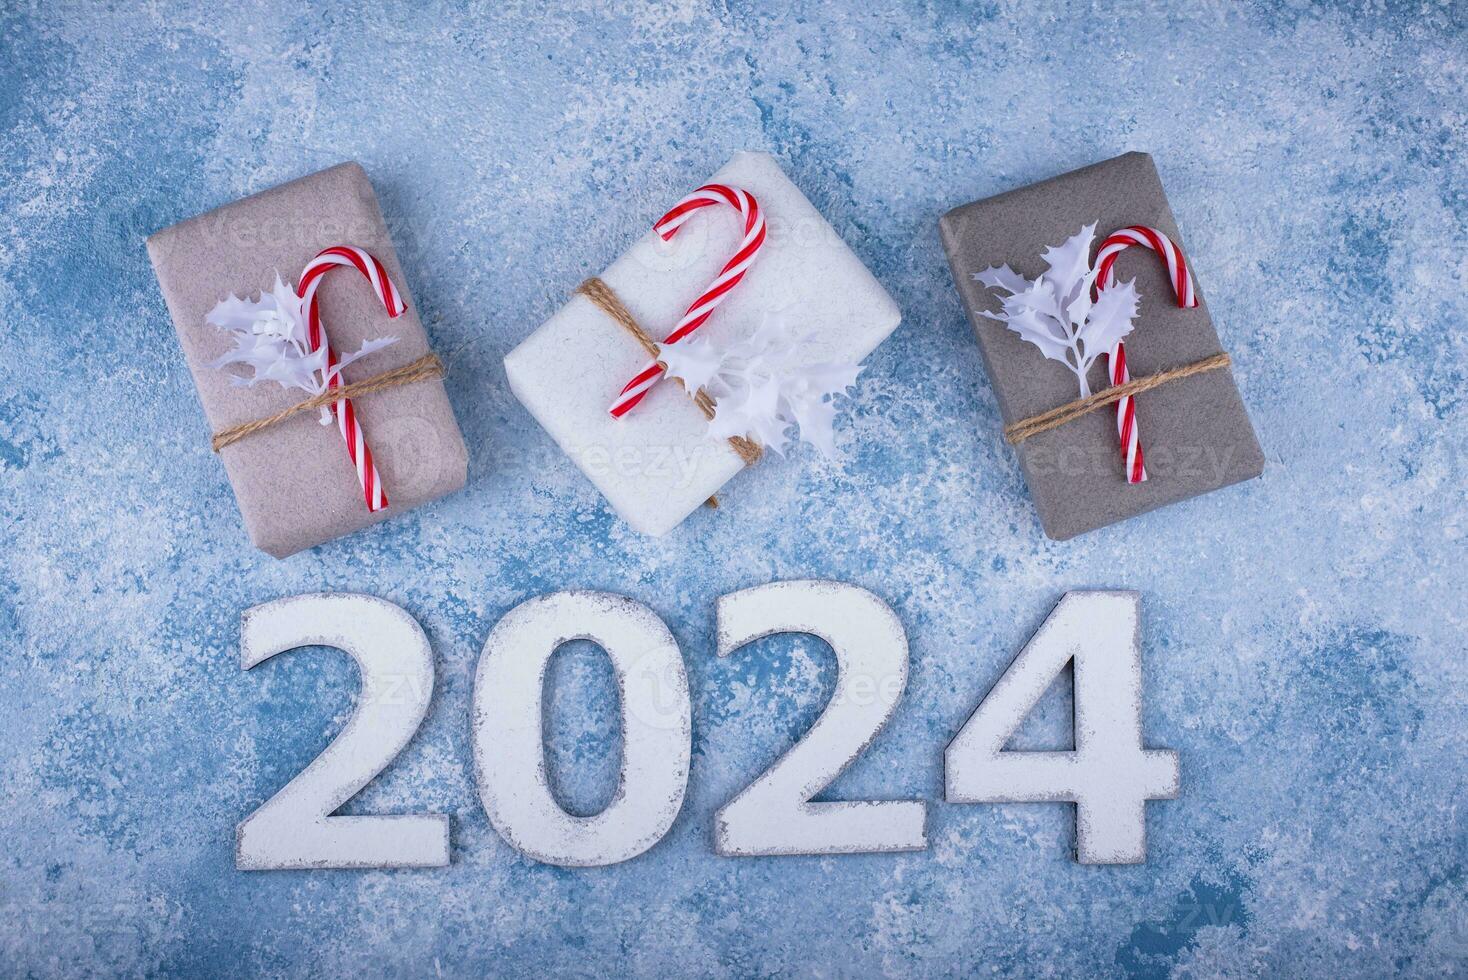 New Year composition with 2024 number photo